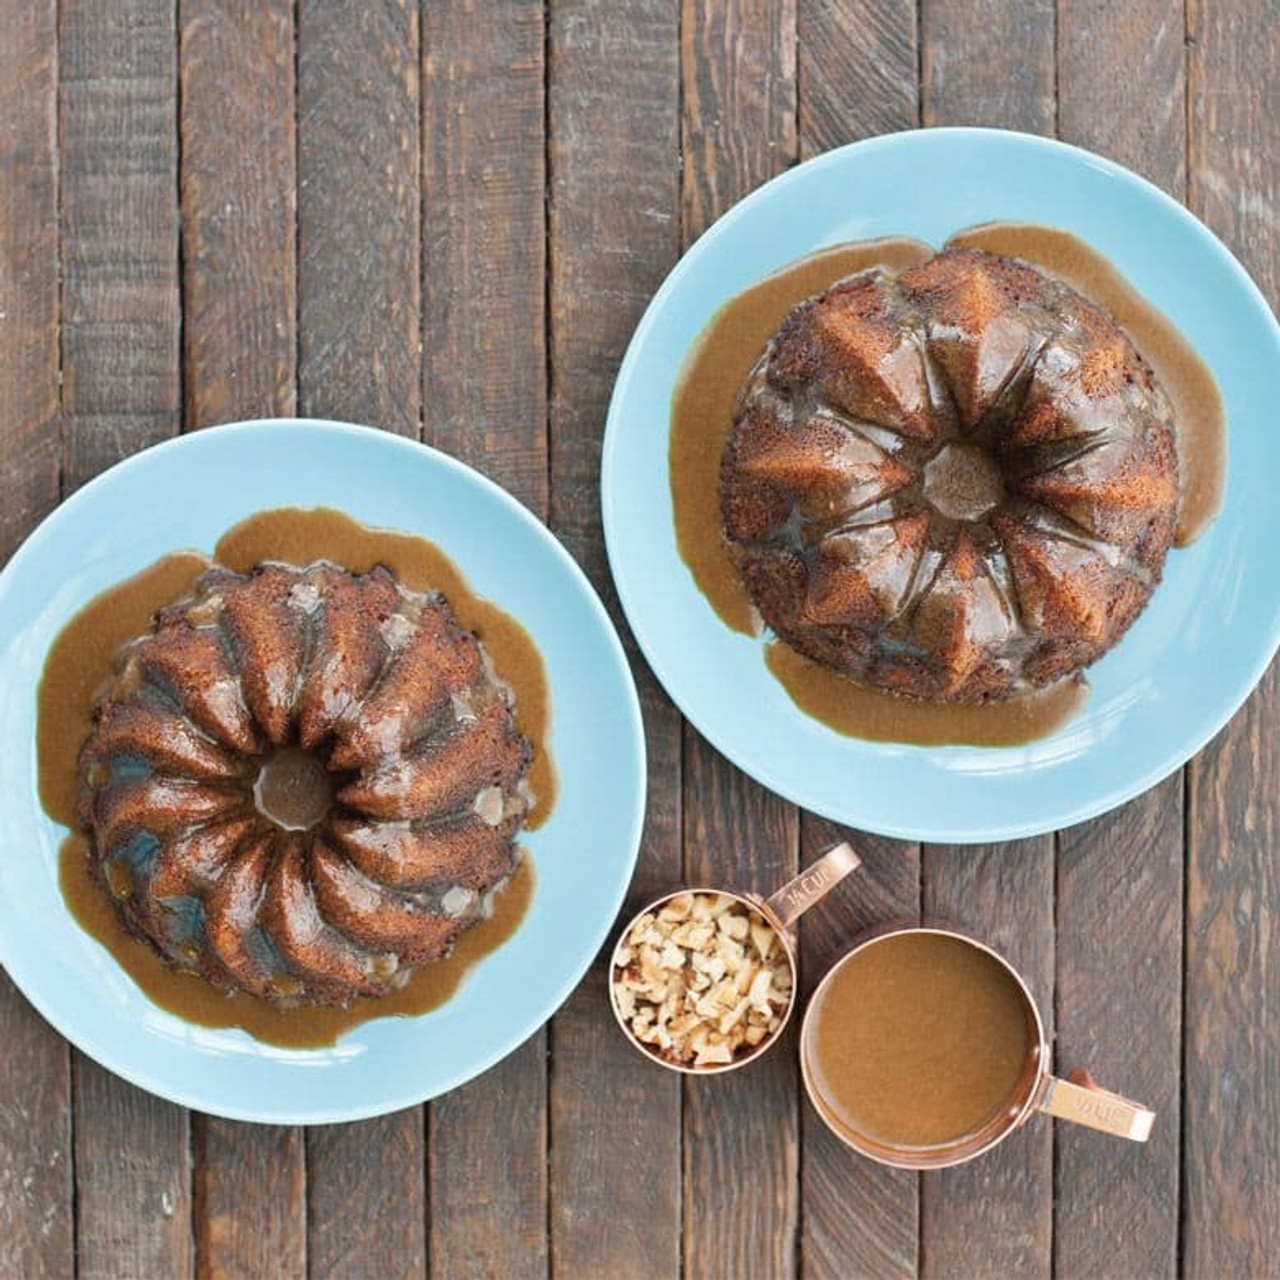 https://cdn11.bigcommerce.com/s-hccytny0od/images/stencil/1280x1280/products/2057/6747/nordic-ware-bundt-duet-pan-2__80693.1538060373.jpg?c=2?imbypass=on